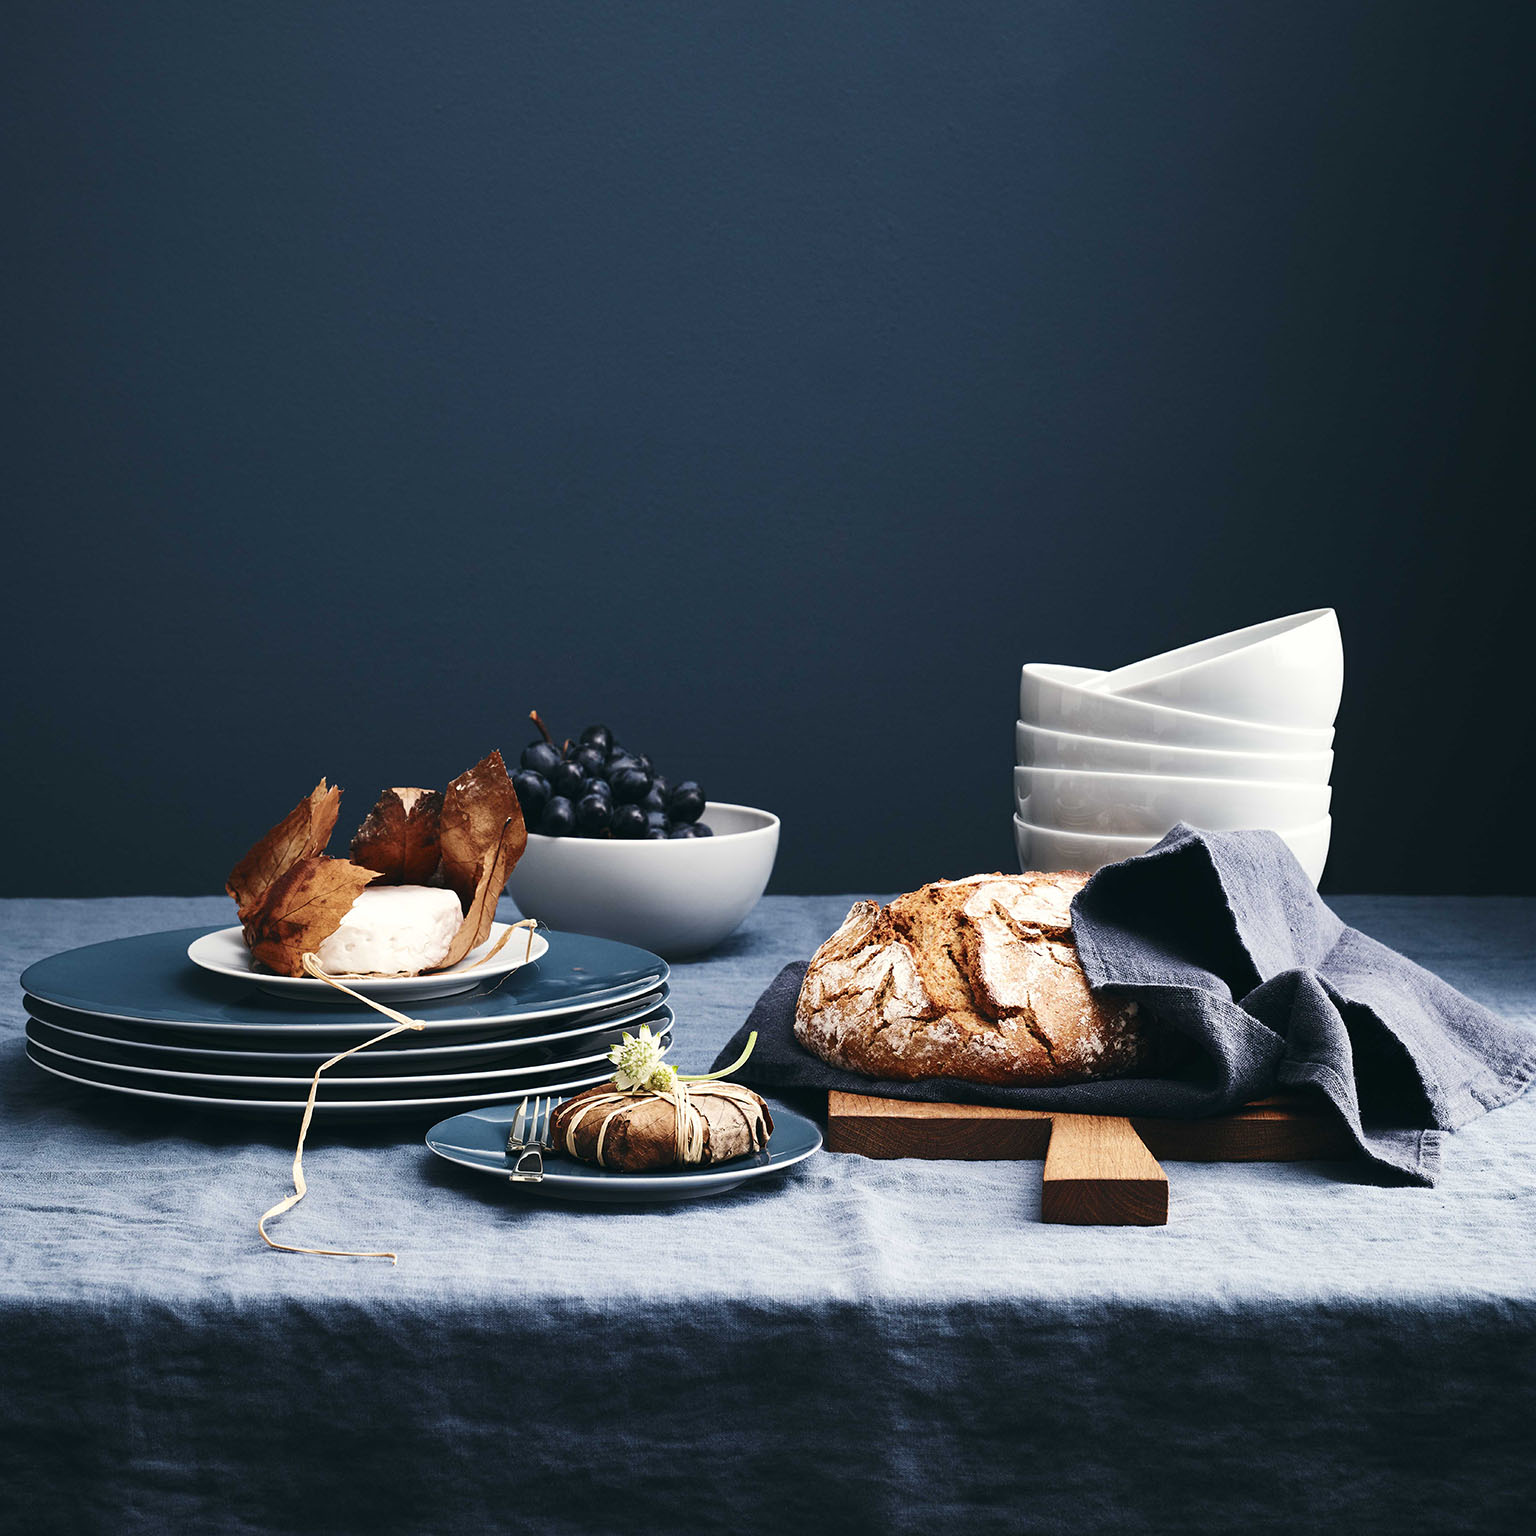 Table with dark blue linen tablecloth against a dark blue background with Comfort Blue plates from TAC Sensual, grapes, bread and a stack of bowls in TAC White.